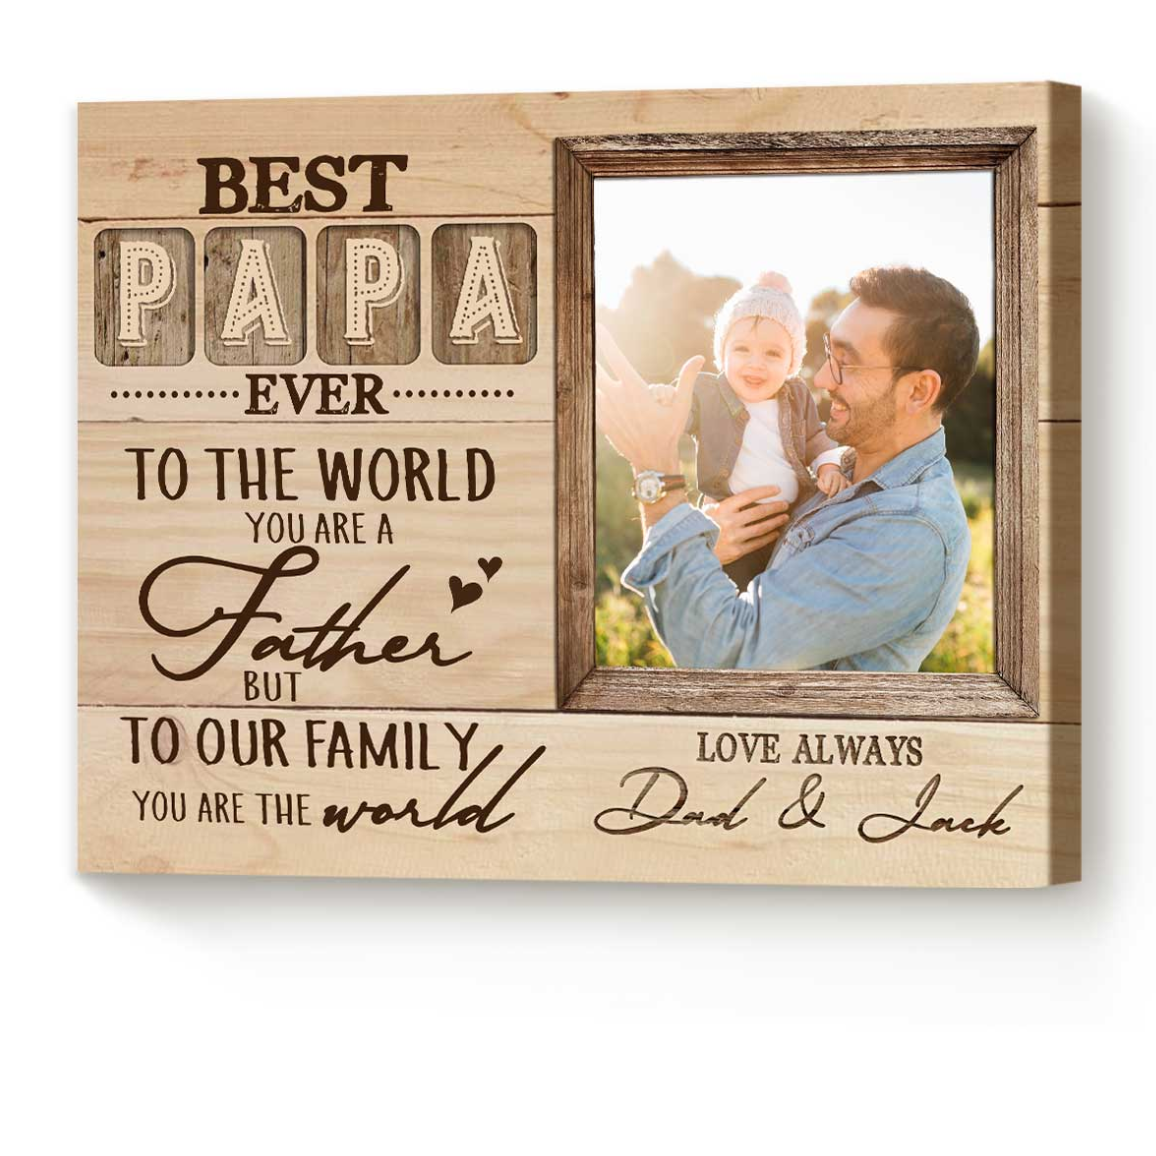 Dads Fathers Day Gifts, Personalized Dad Gifts, Our Family You Are The World